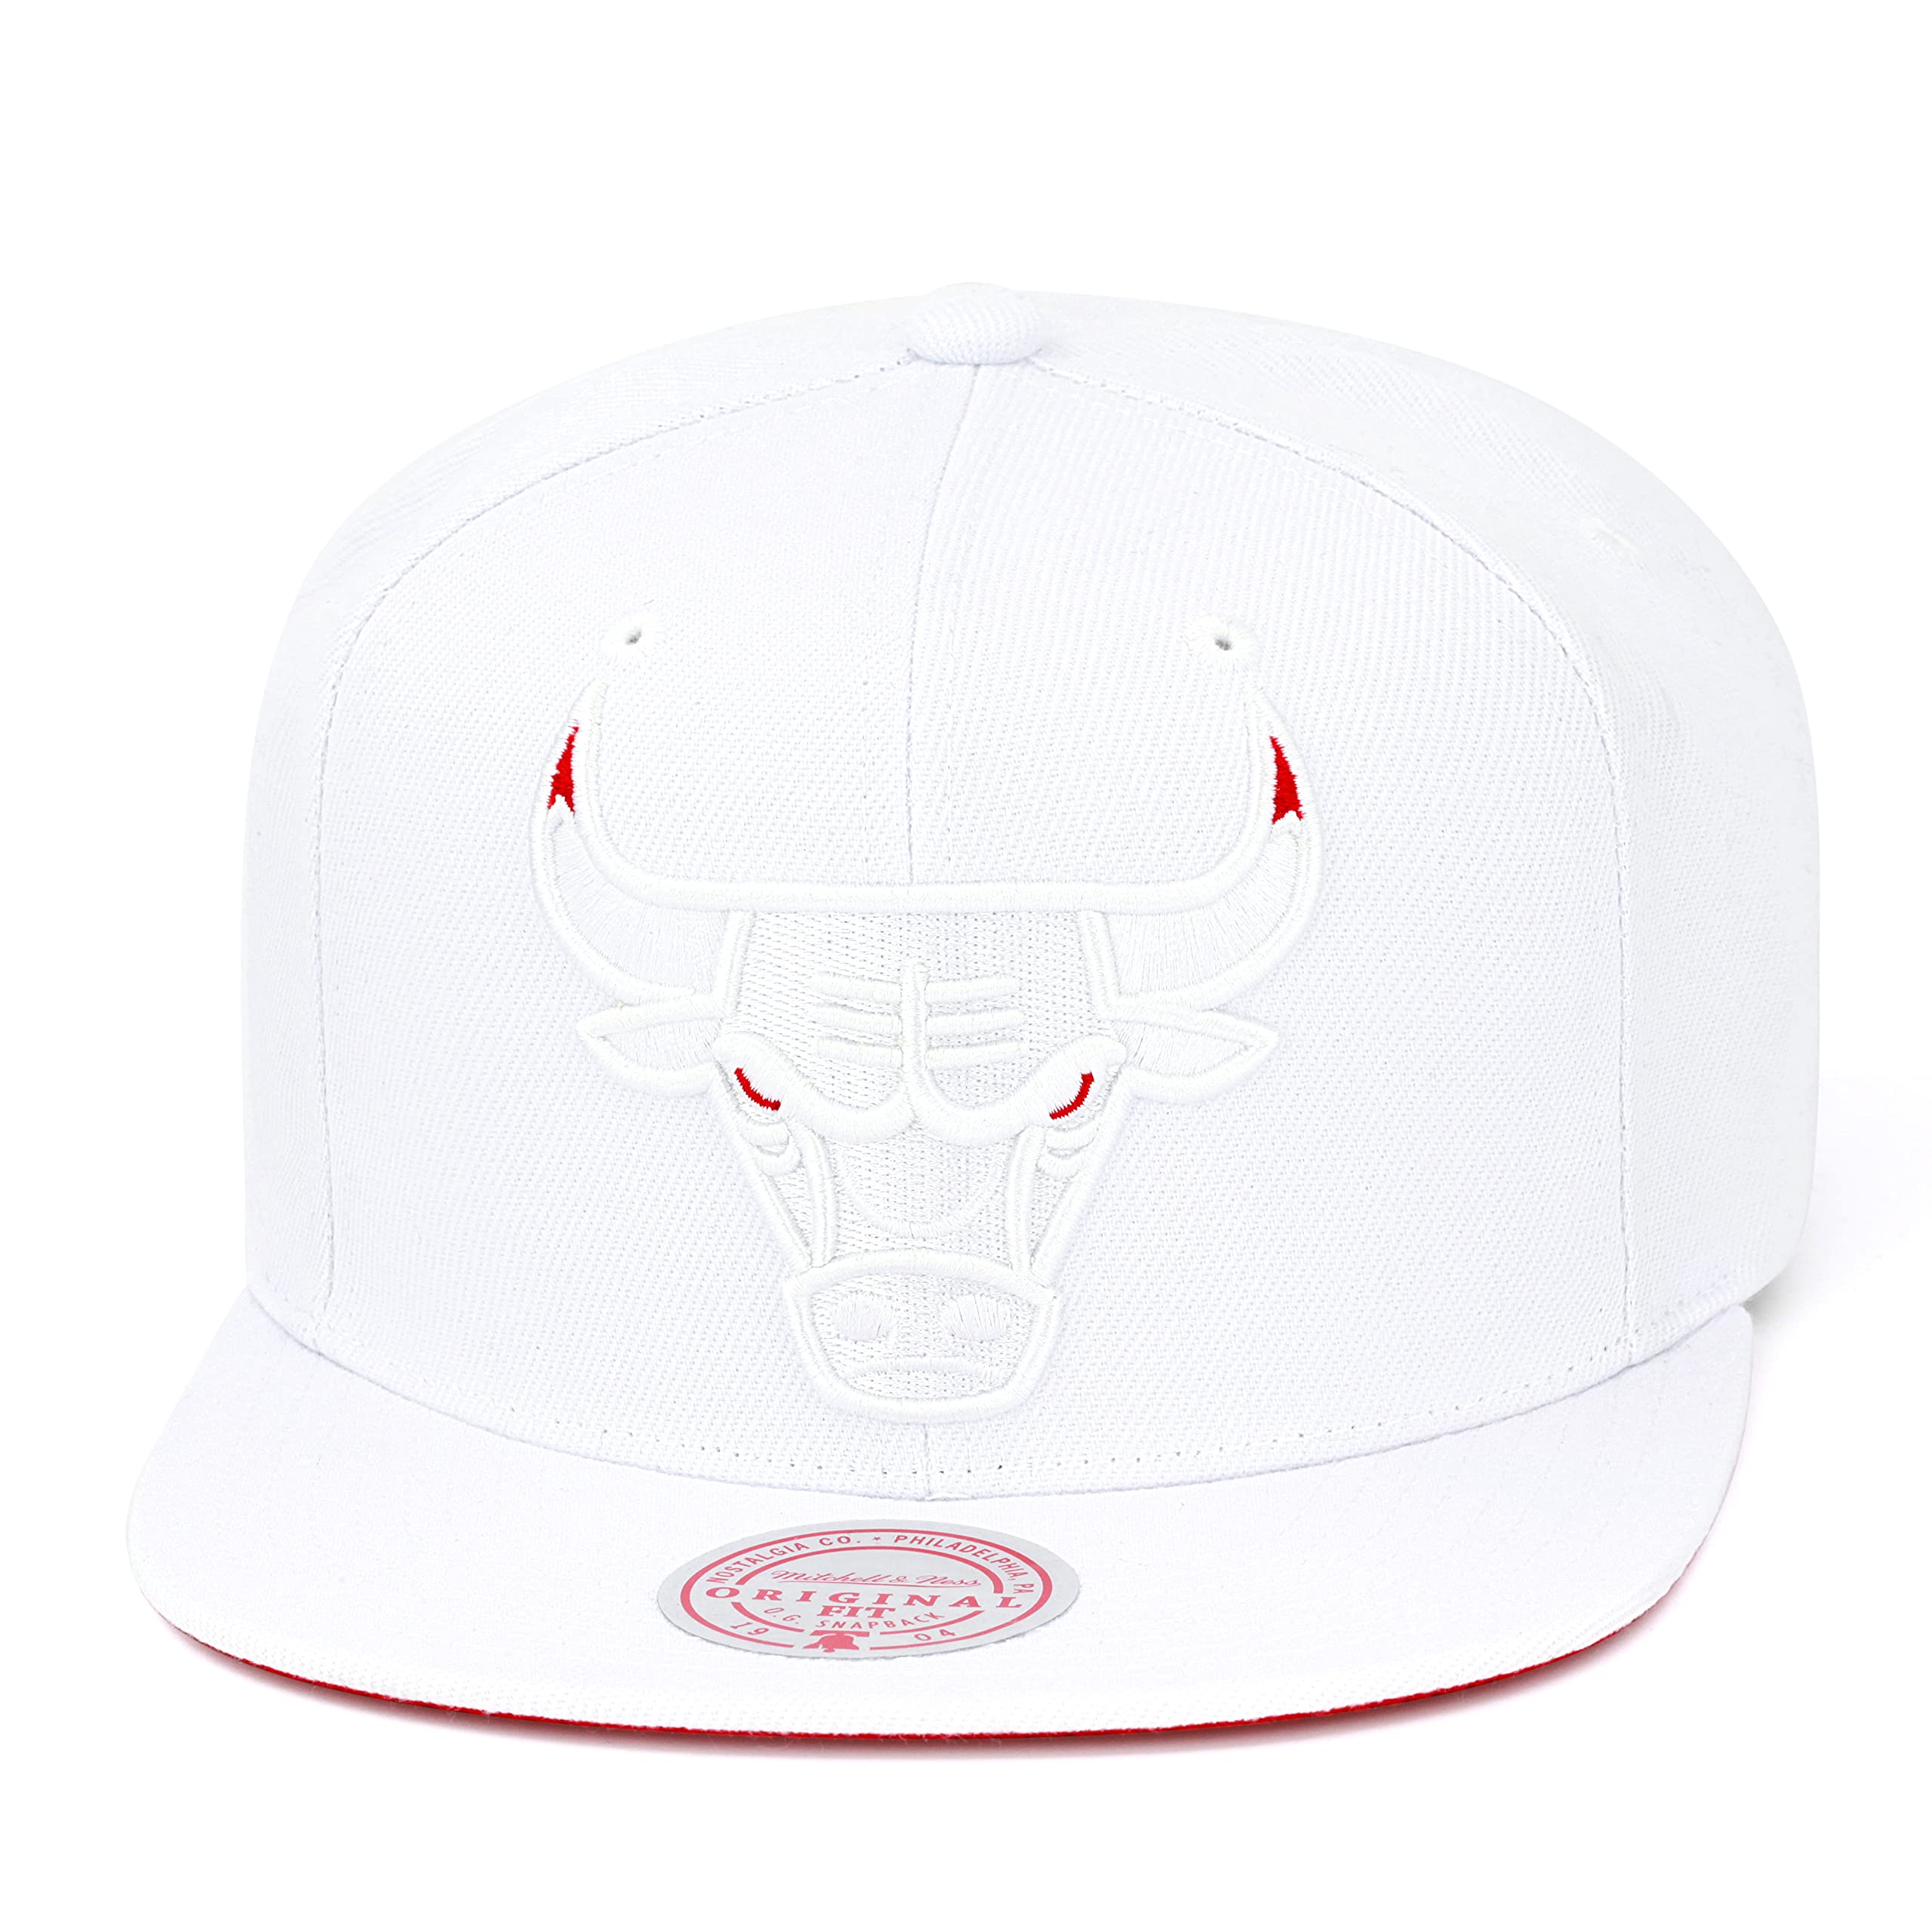 Mitchell & Ness Chicago Bulls Snapback Hat Adjustable Cap - White/Red Eyes - Caps Fitted Caps Fitted Mitchell & Ness